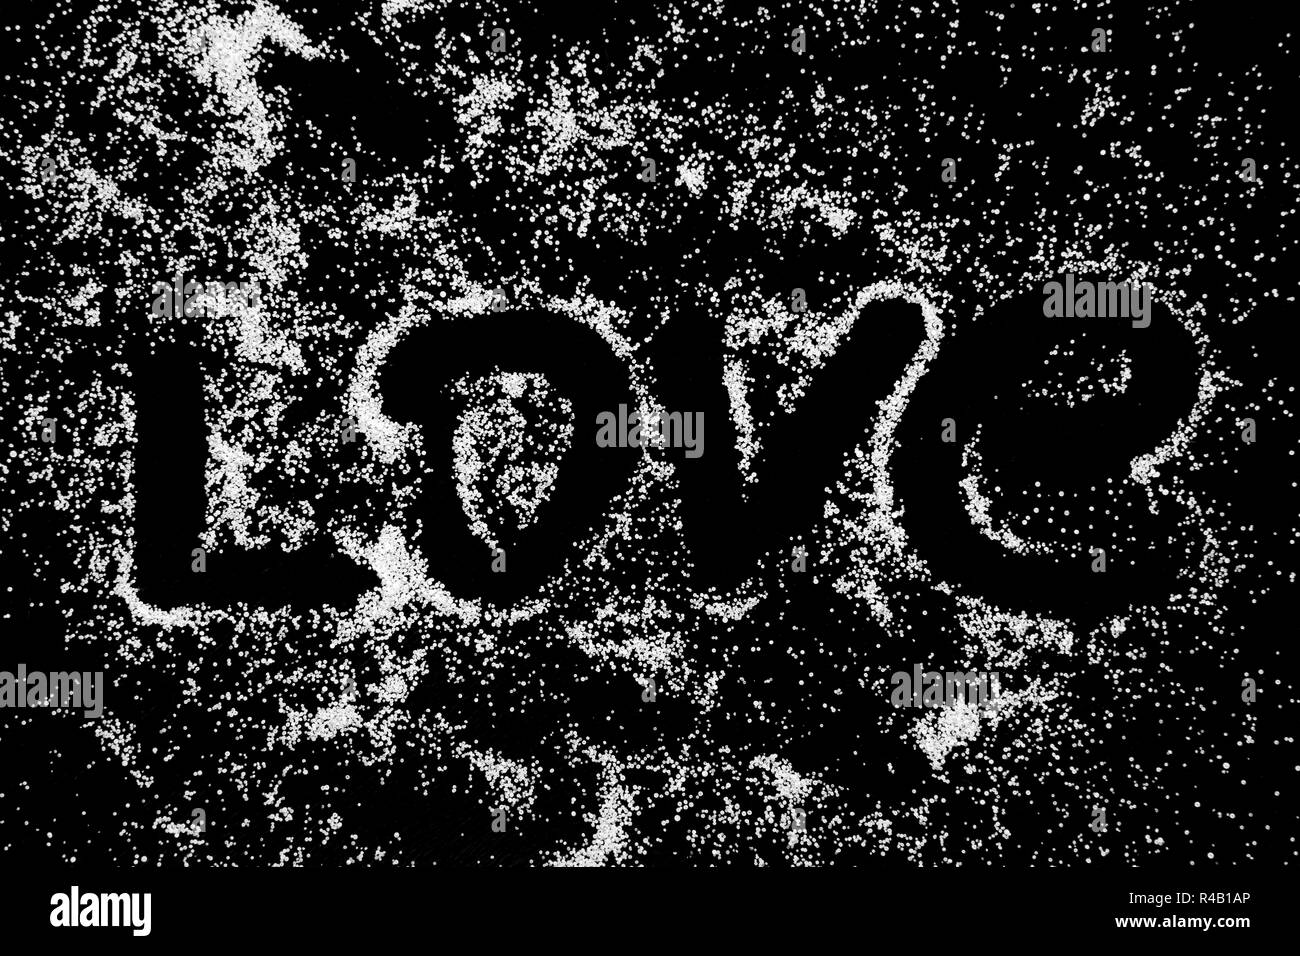 Love word symbol drawing by finger on white salt powder on black background. Capital and italics letters. Romantic St. Valentines Day holidays concept with place for text. Copy space. Stock Photo